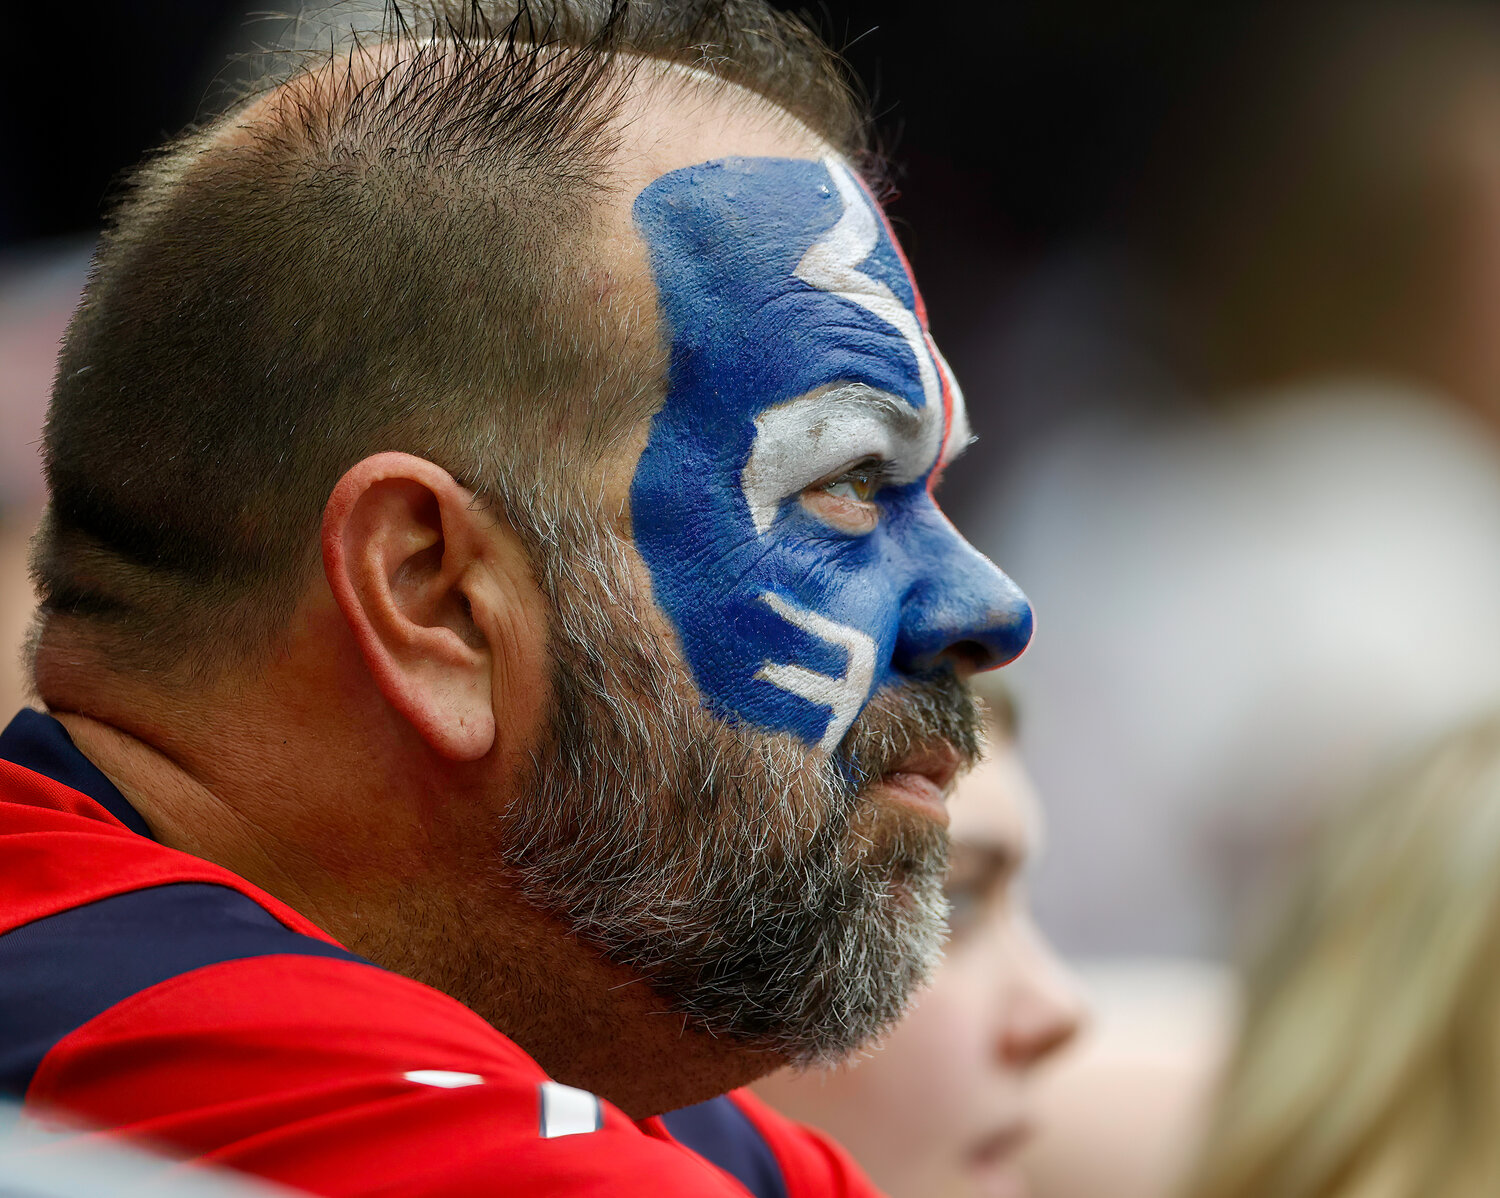 A Houston Texans fan looks on during an NFL game between the Texans and the Colts on September 17, 2023 in Houston. The Colts won, 31-20.